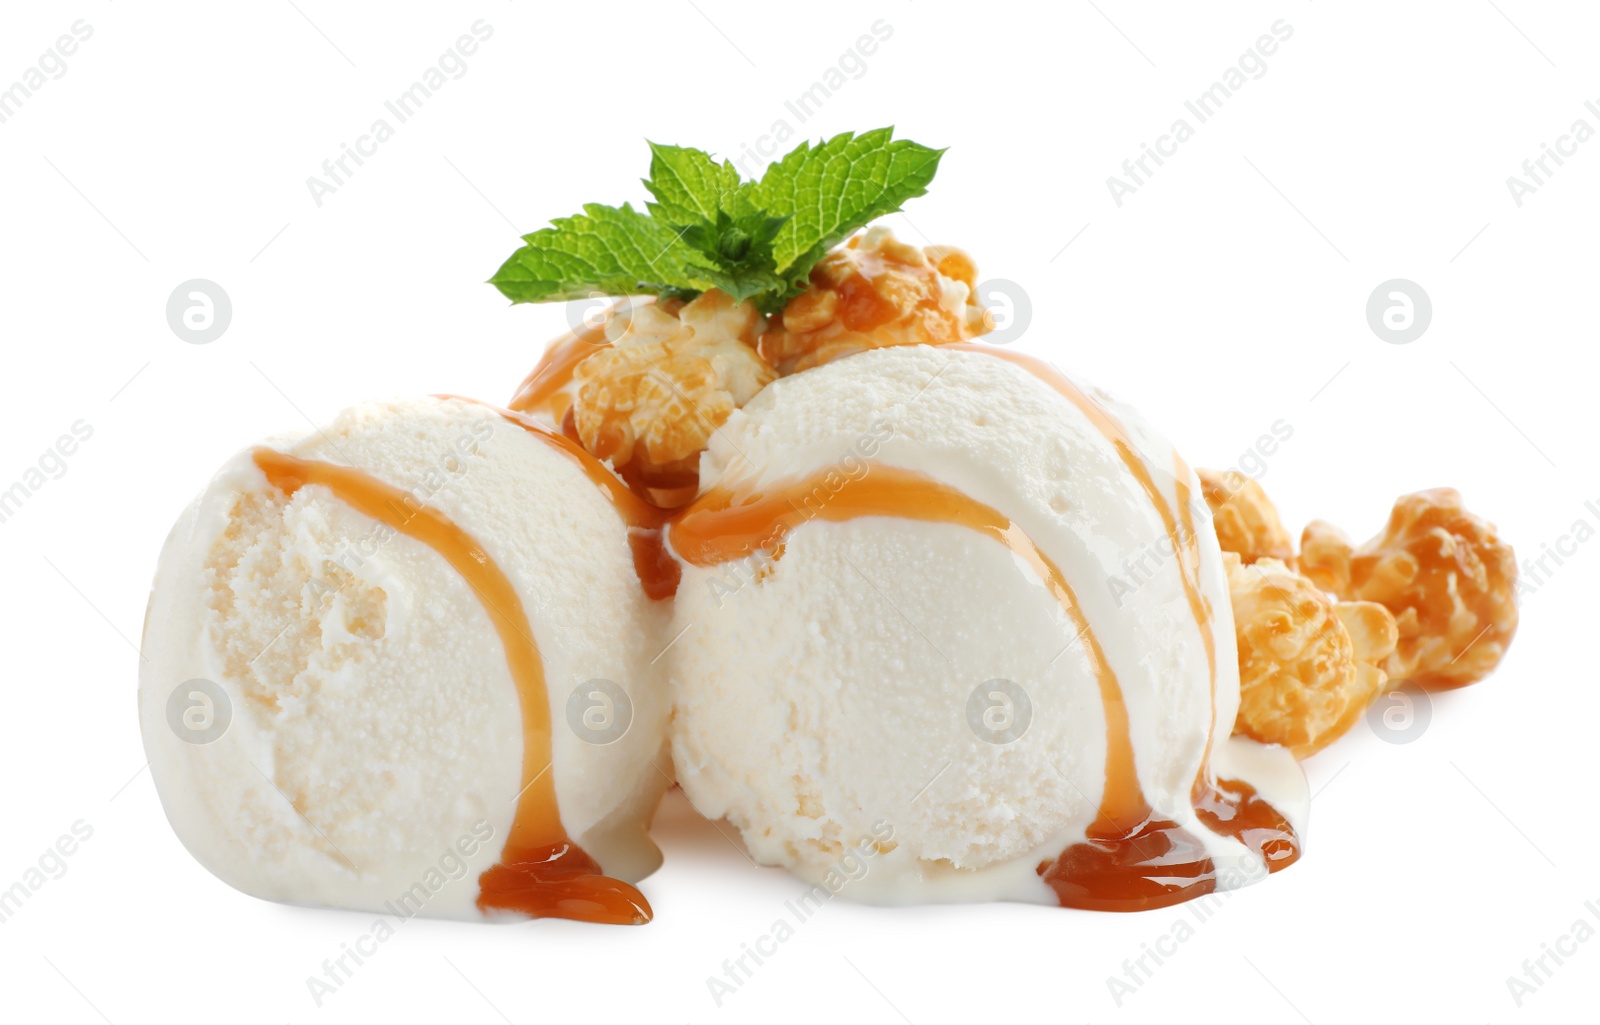 Photo of Scoops of delicious ice cream with caramel sauce, mint and popcorn on white background